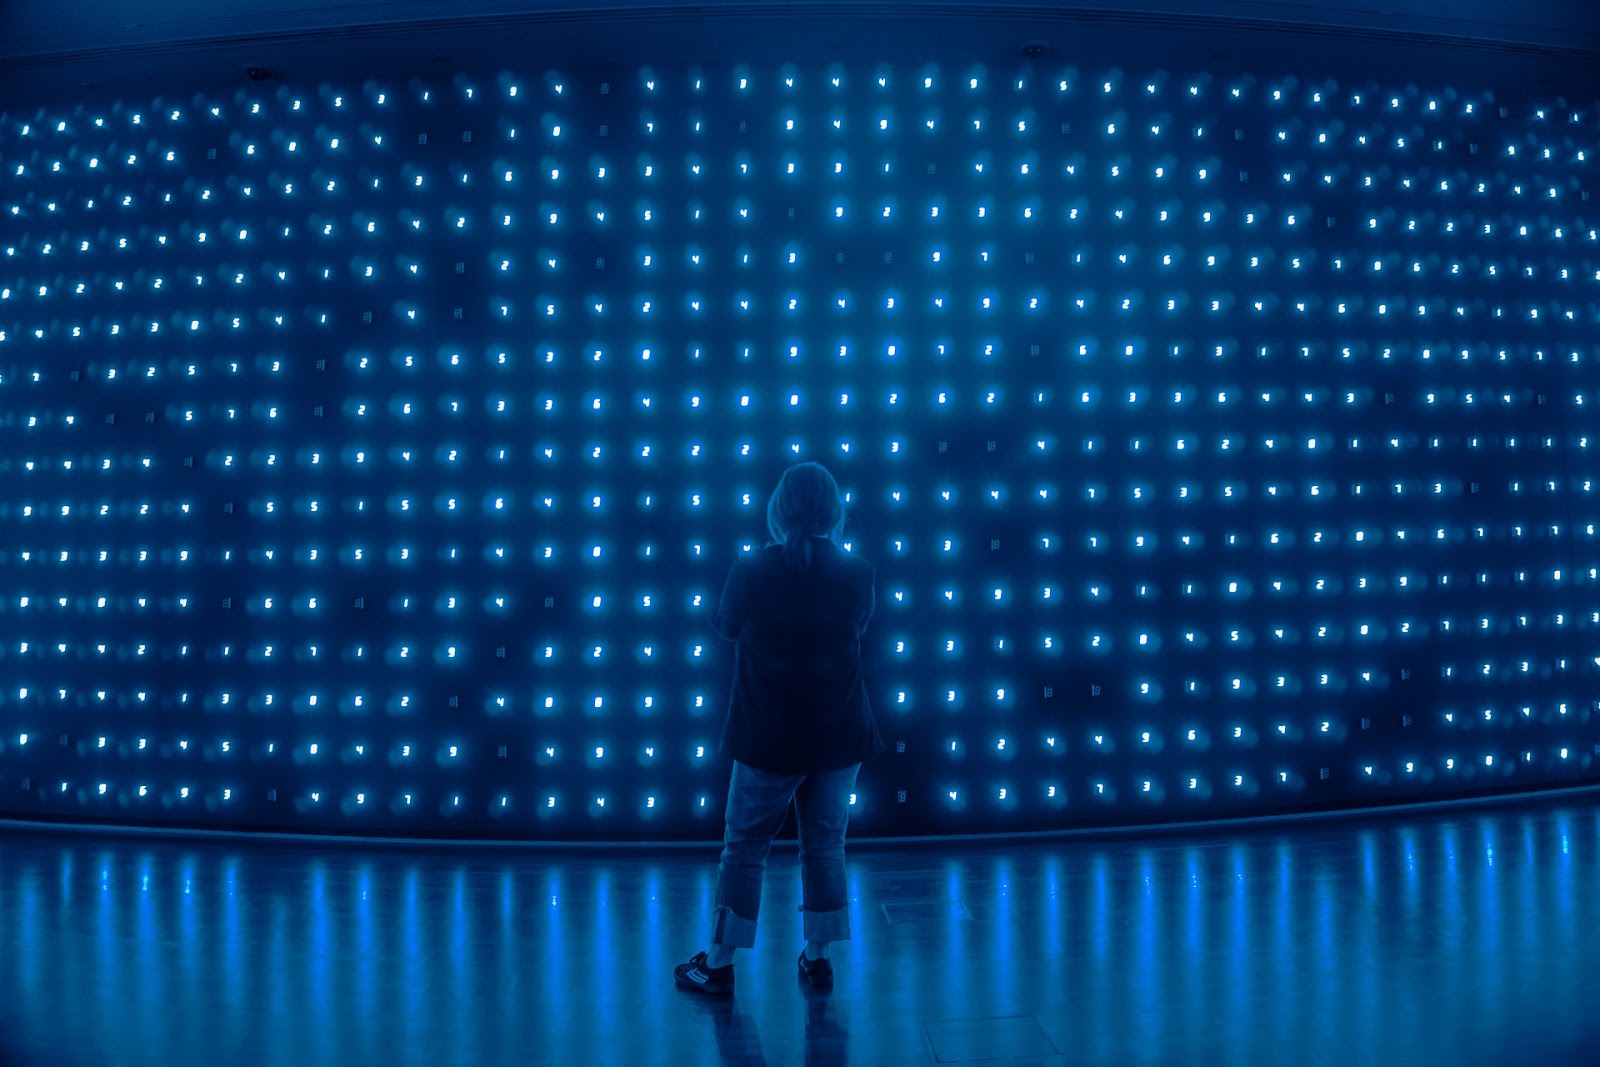 A person looking at a bunch of blue lights, resembling a network